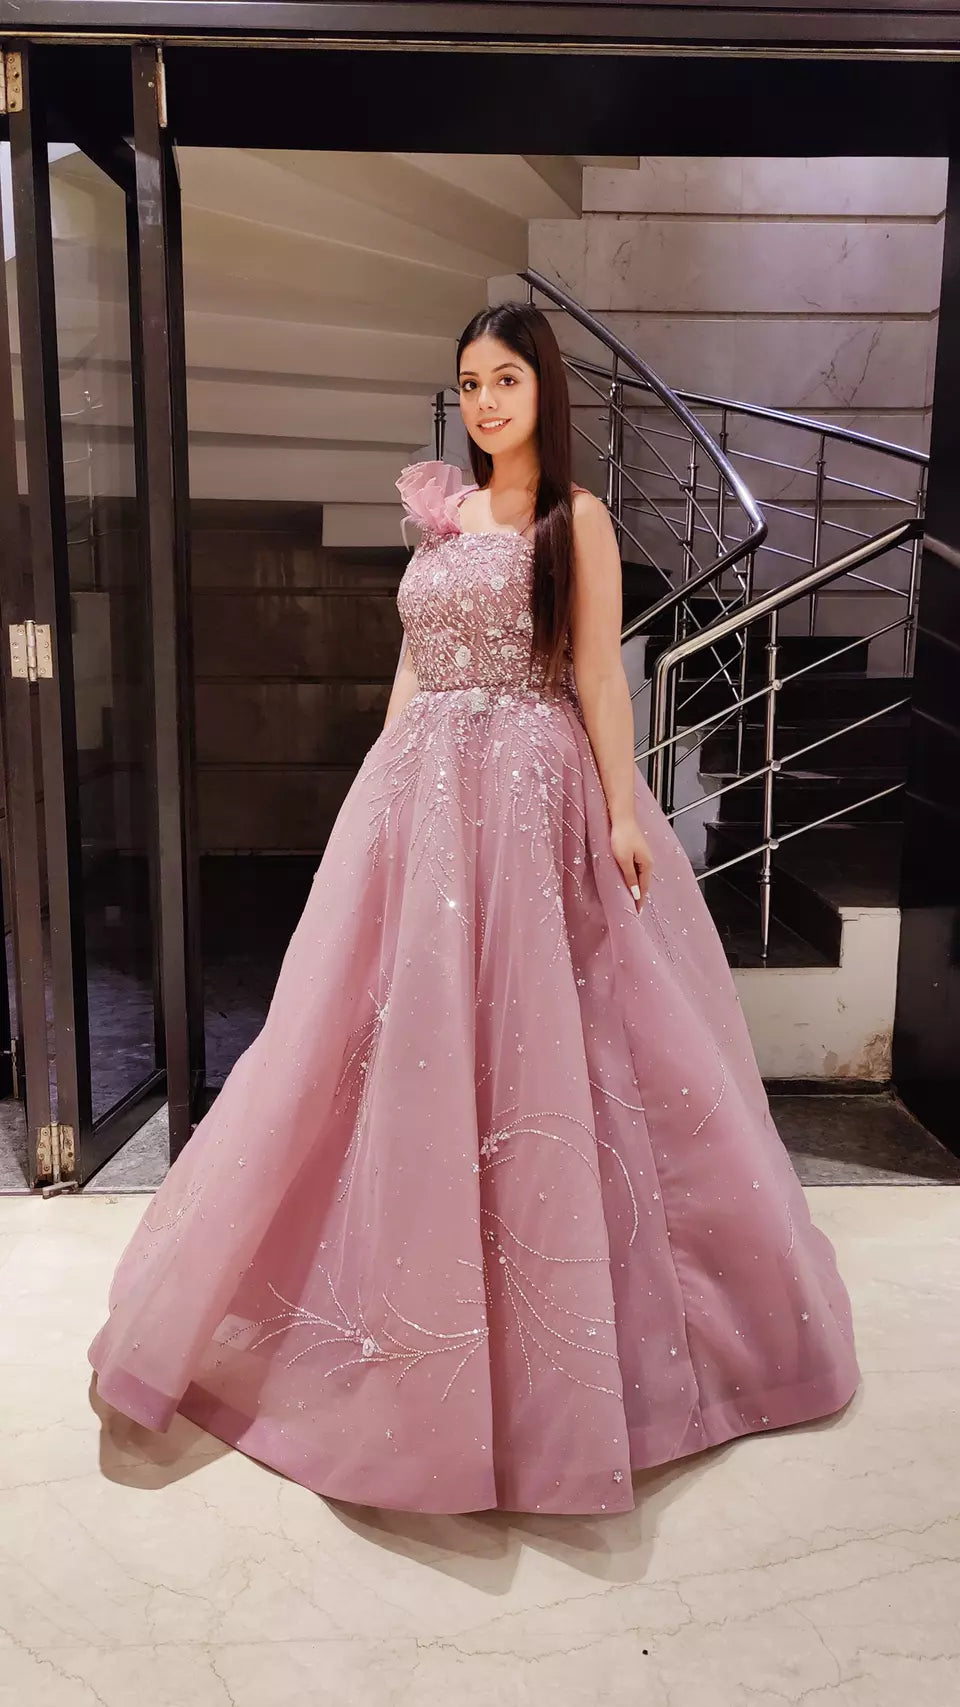 Unique Gray Lace Mixed Blushing Pink Satin Prom Dress - Lunss